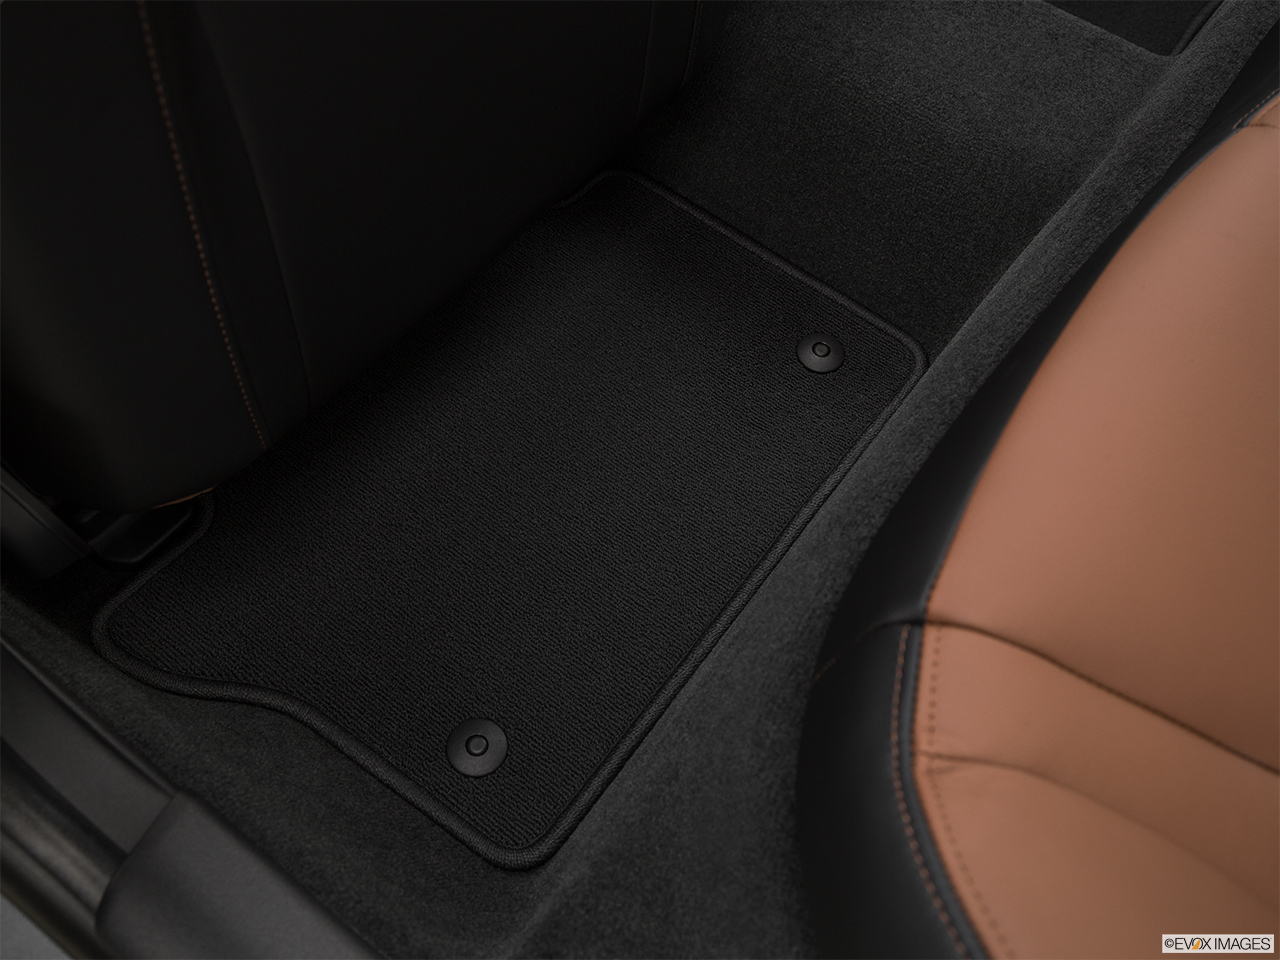 2018 Volvo S60 T5 Inscription Rear driver's side floor mat. Mid-seat level from outside looking in. 